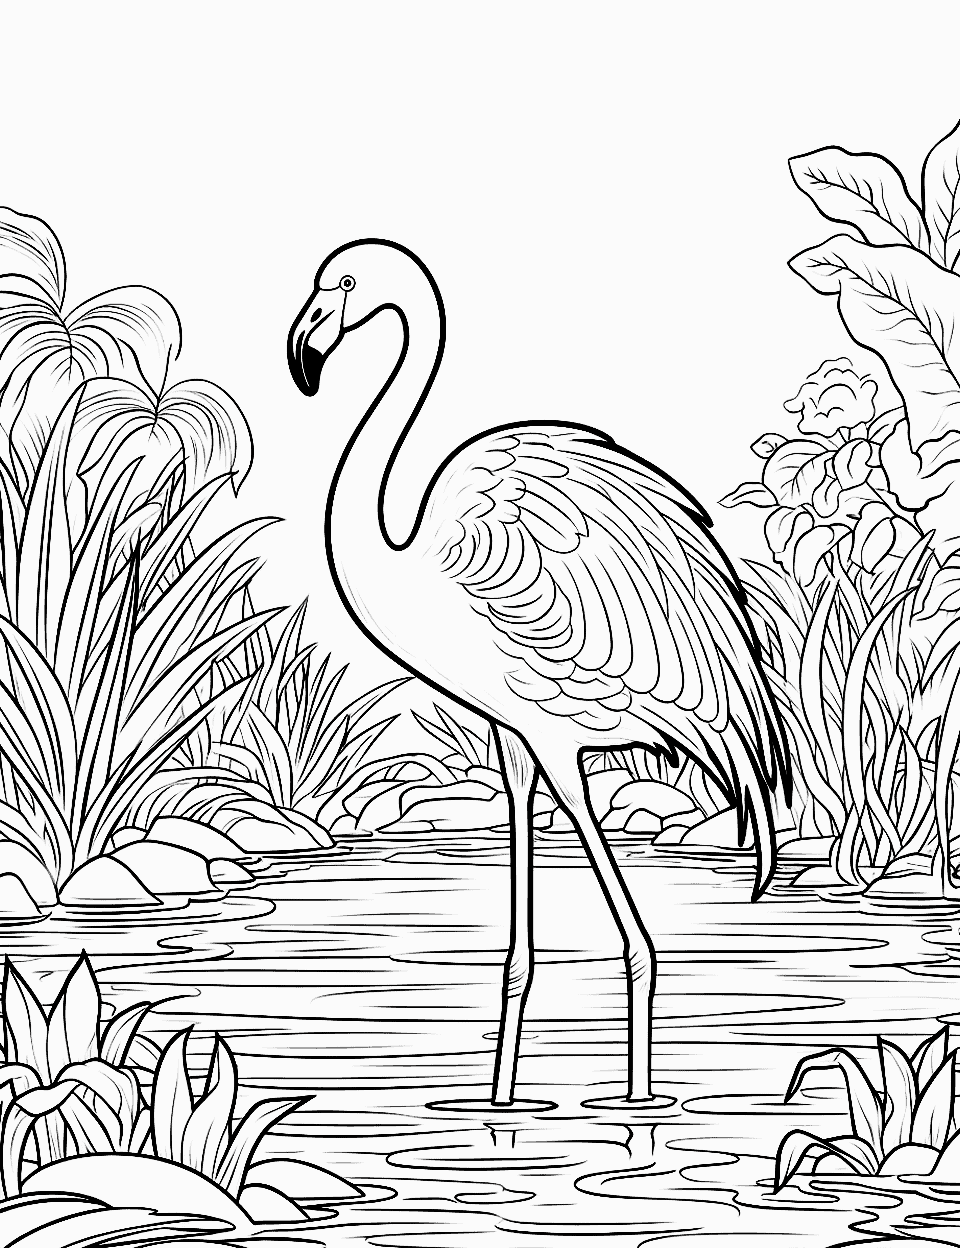 Flamingo in the Rainforest Coloring Page - A lush, green scene of a flamingo in a dense rainforest with tropical plants.